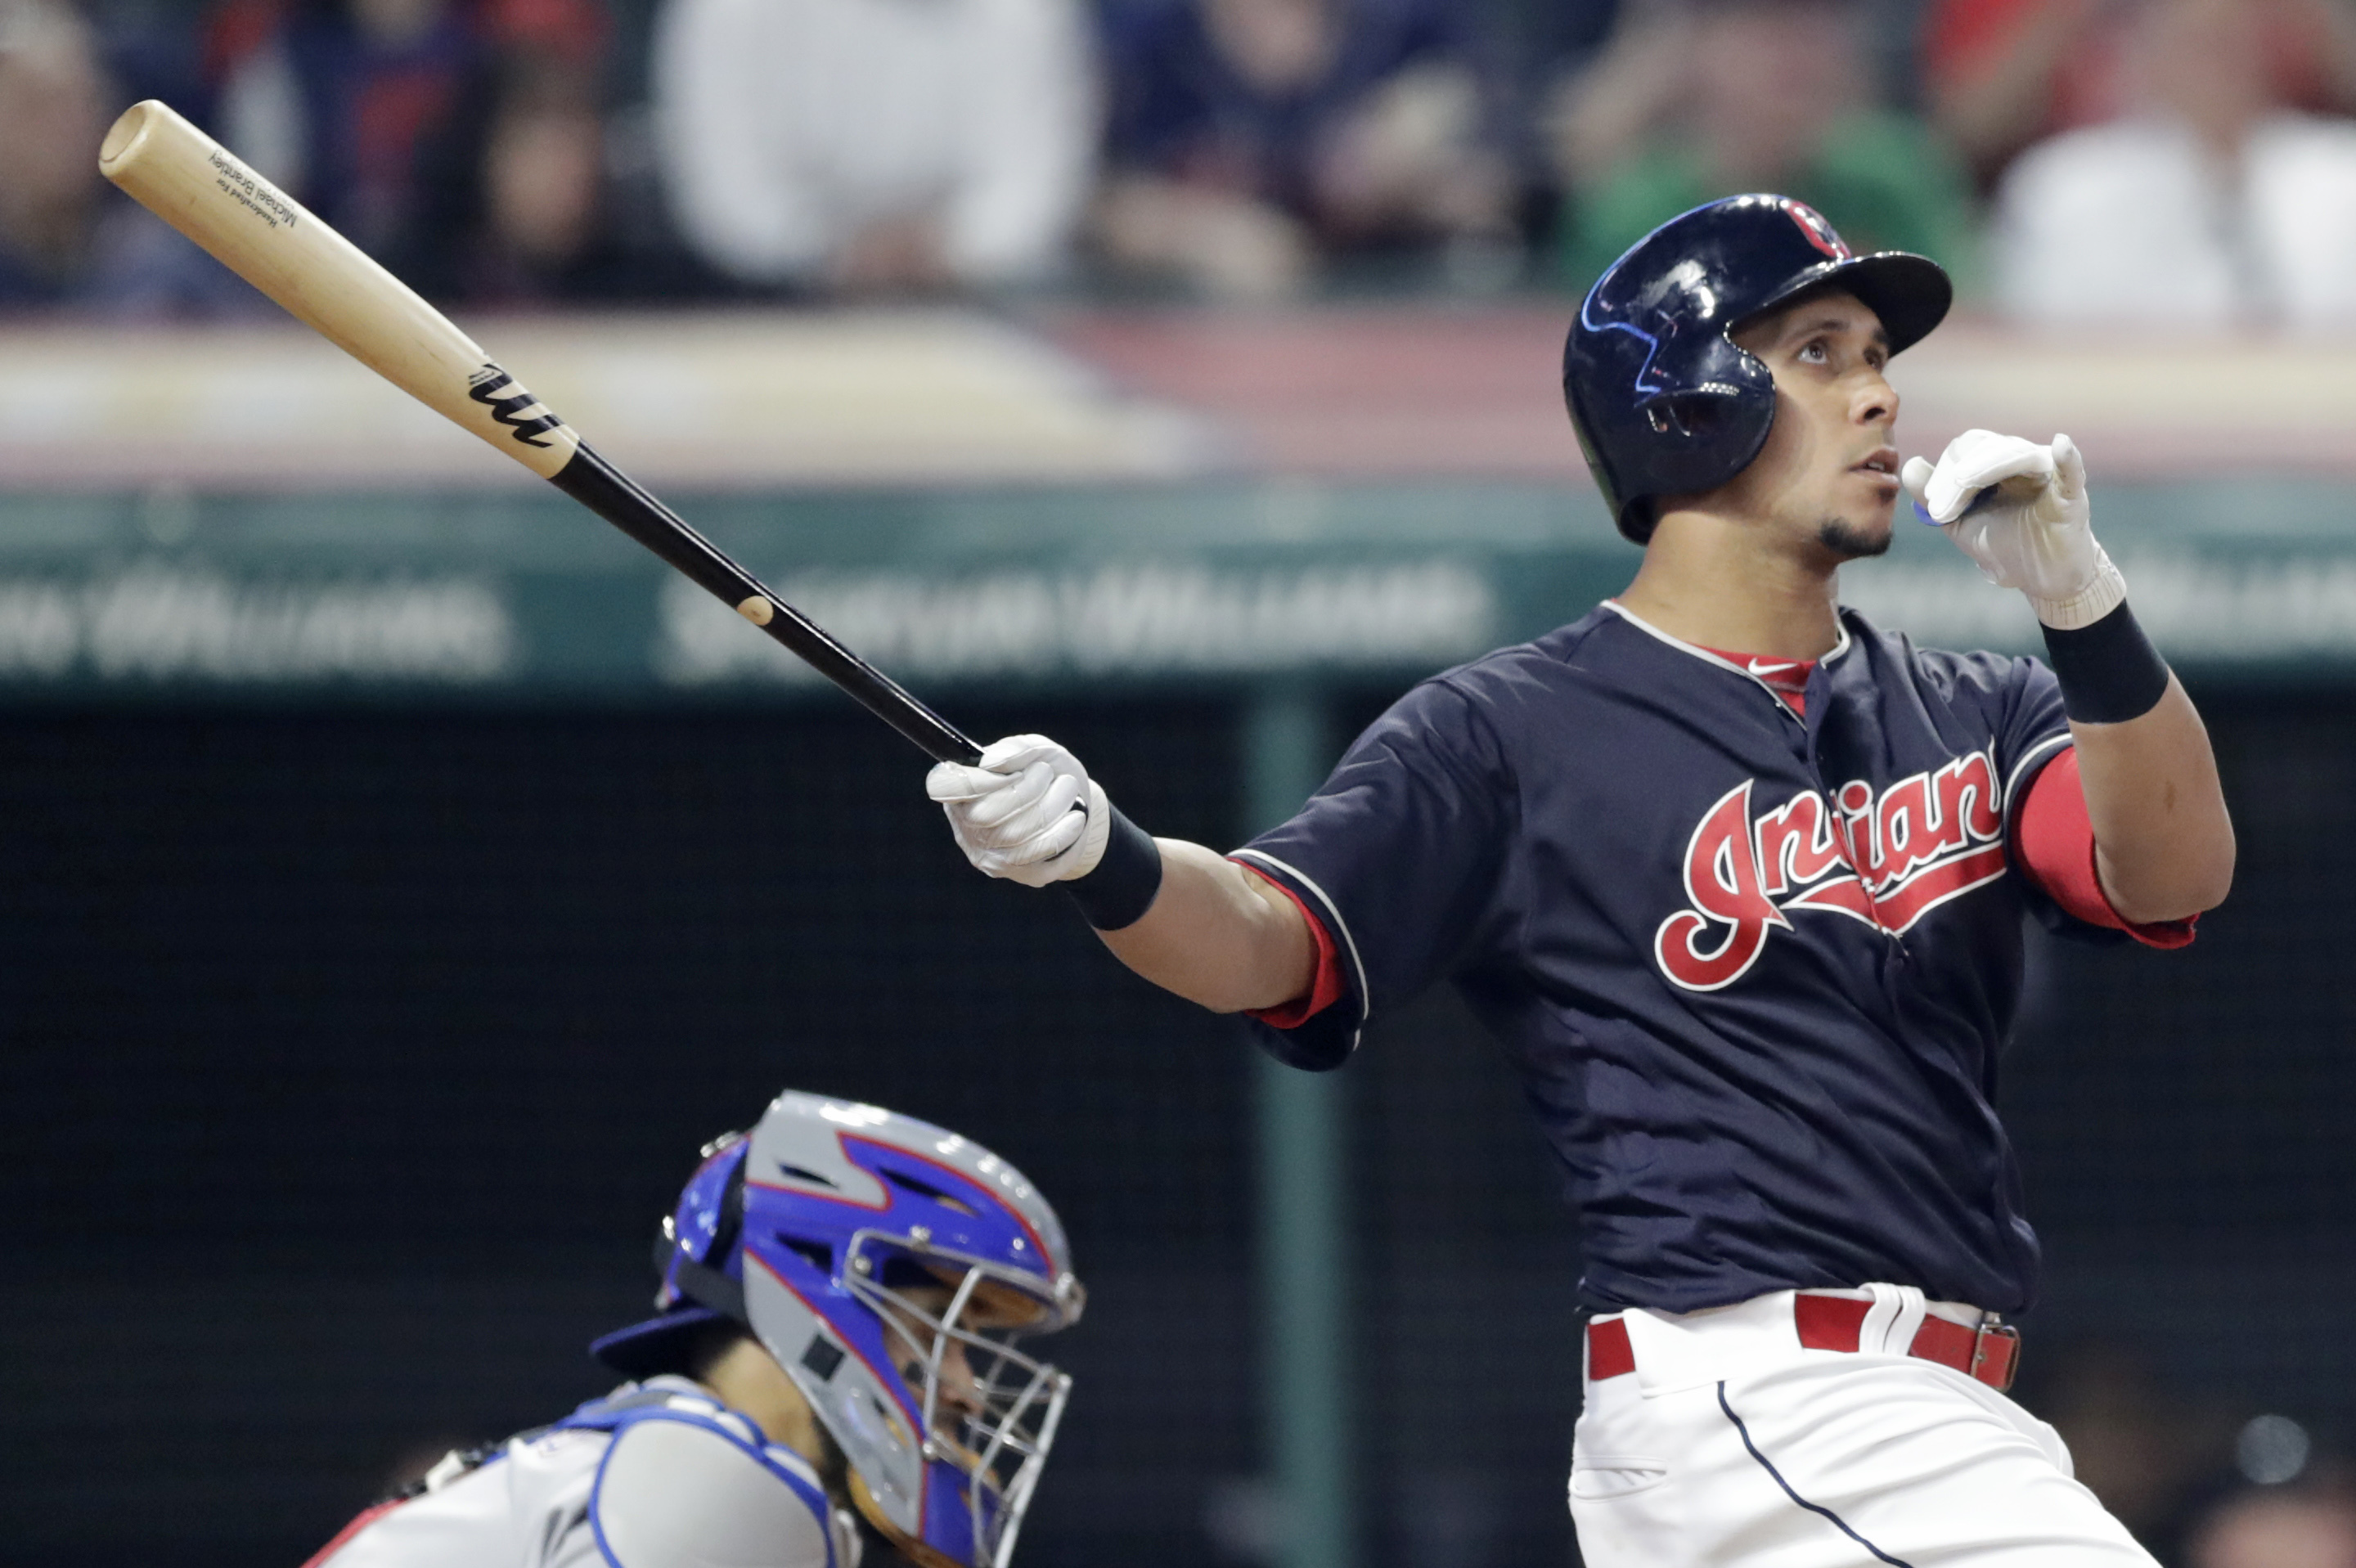 Reports: Indians OF Michael Brantley will not rejoin team this season